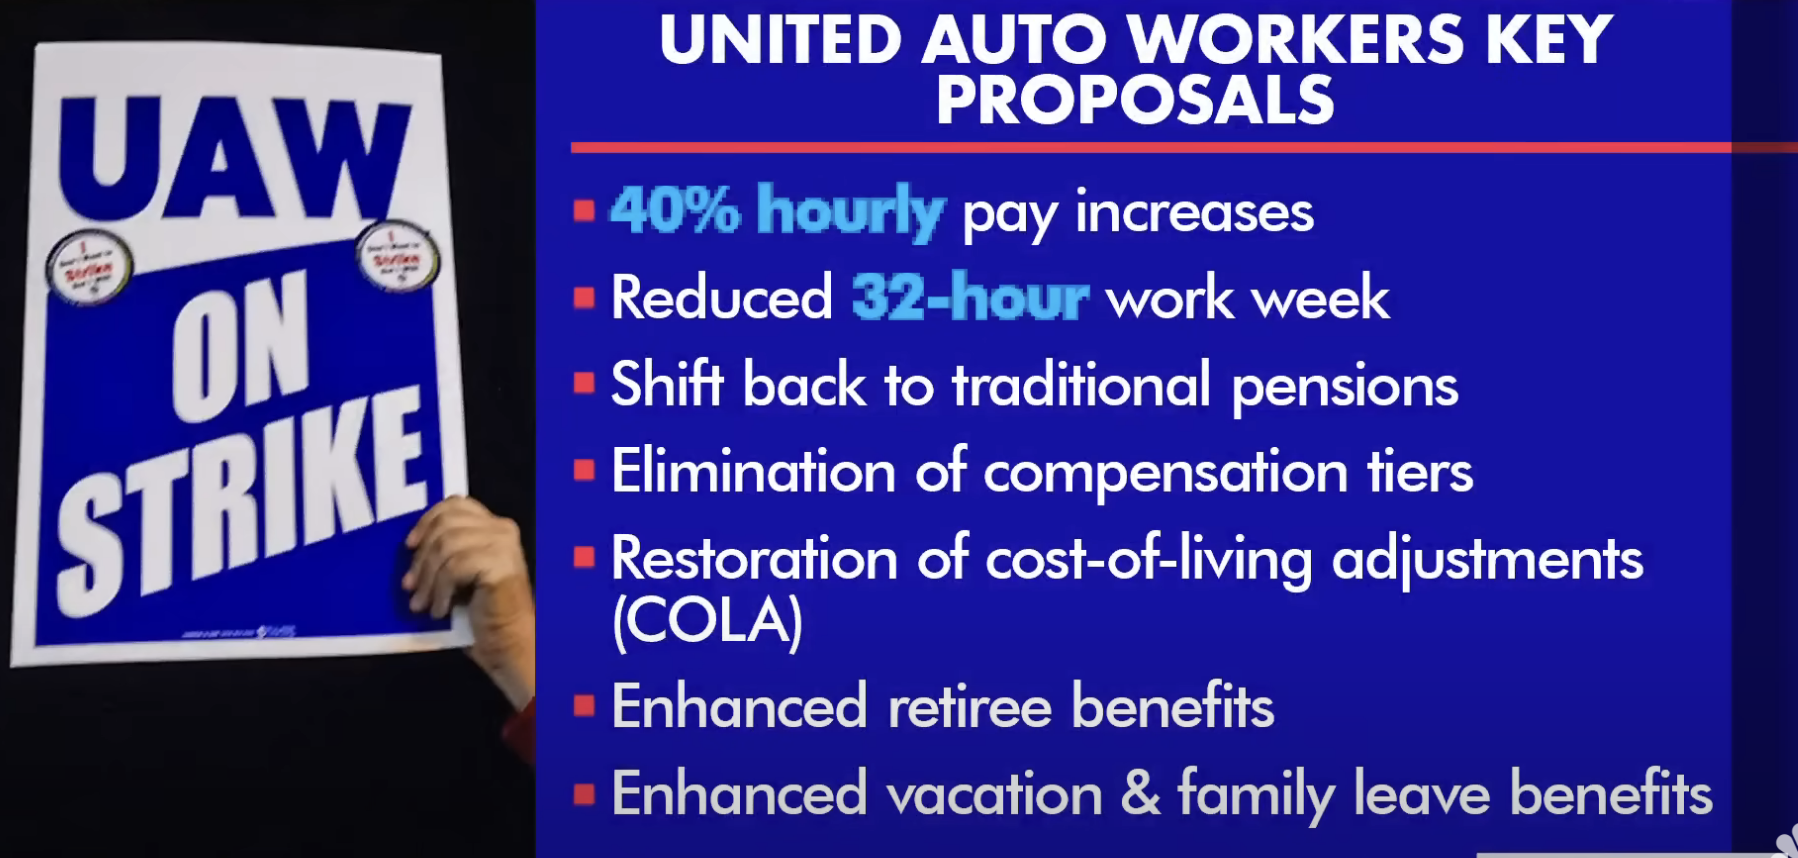 UAW key proposals list includes 40% hourly pay increases, a reduced 32-hour work week, a shift back to traditional pensions, elimination of compensation tiers, restoration of cost-of-living adjustments, and more